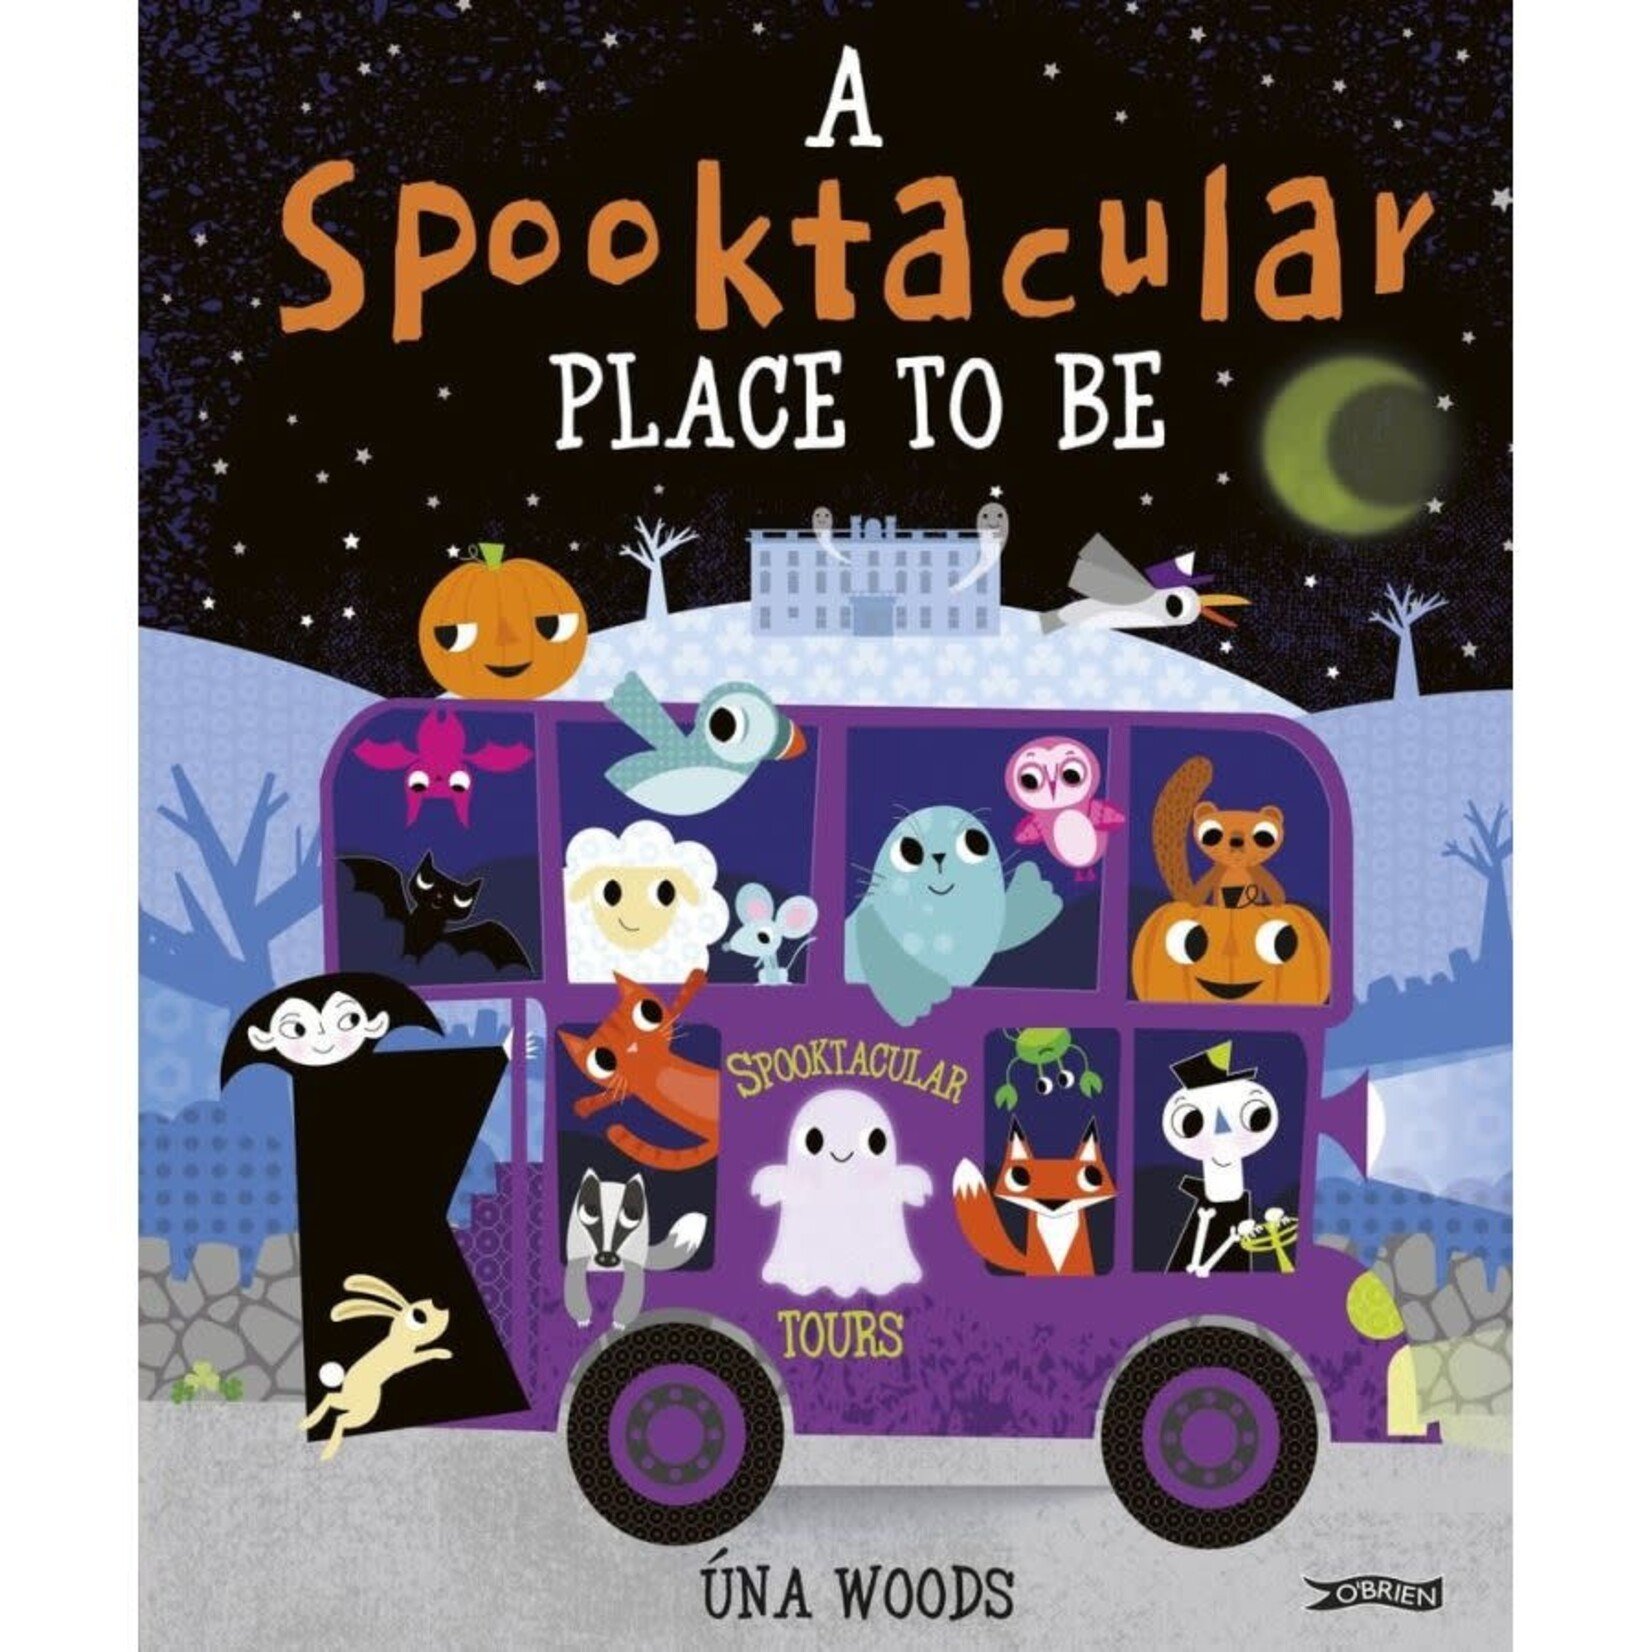 Celtic Books "A Spooktacular Place To Be" by Una Woods